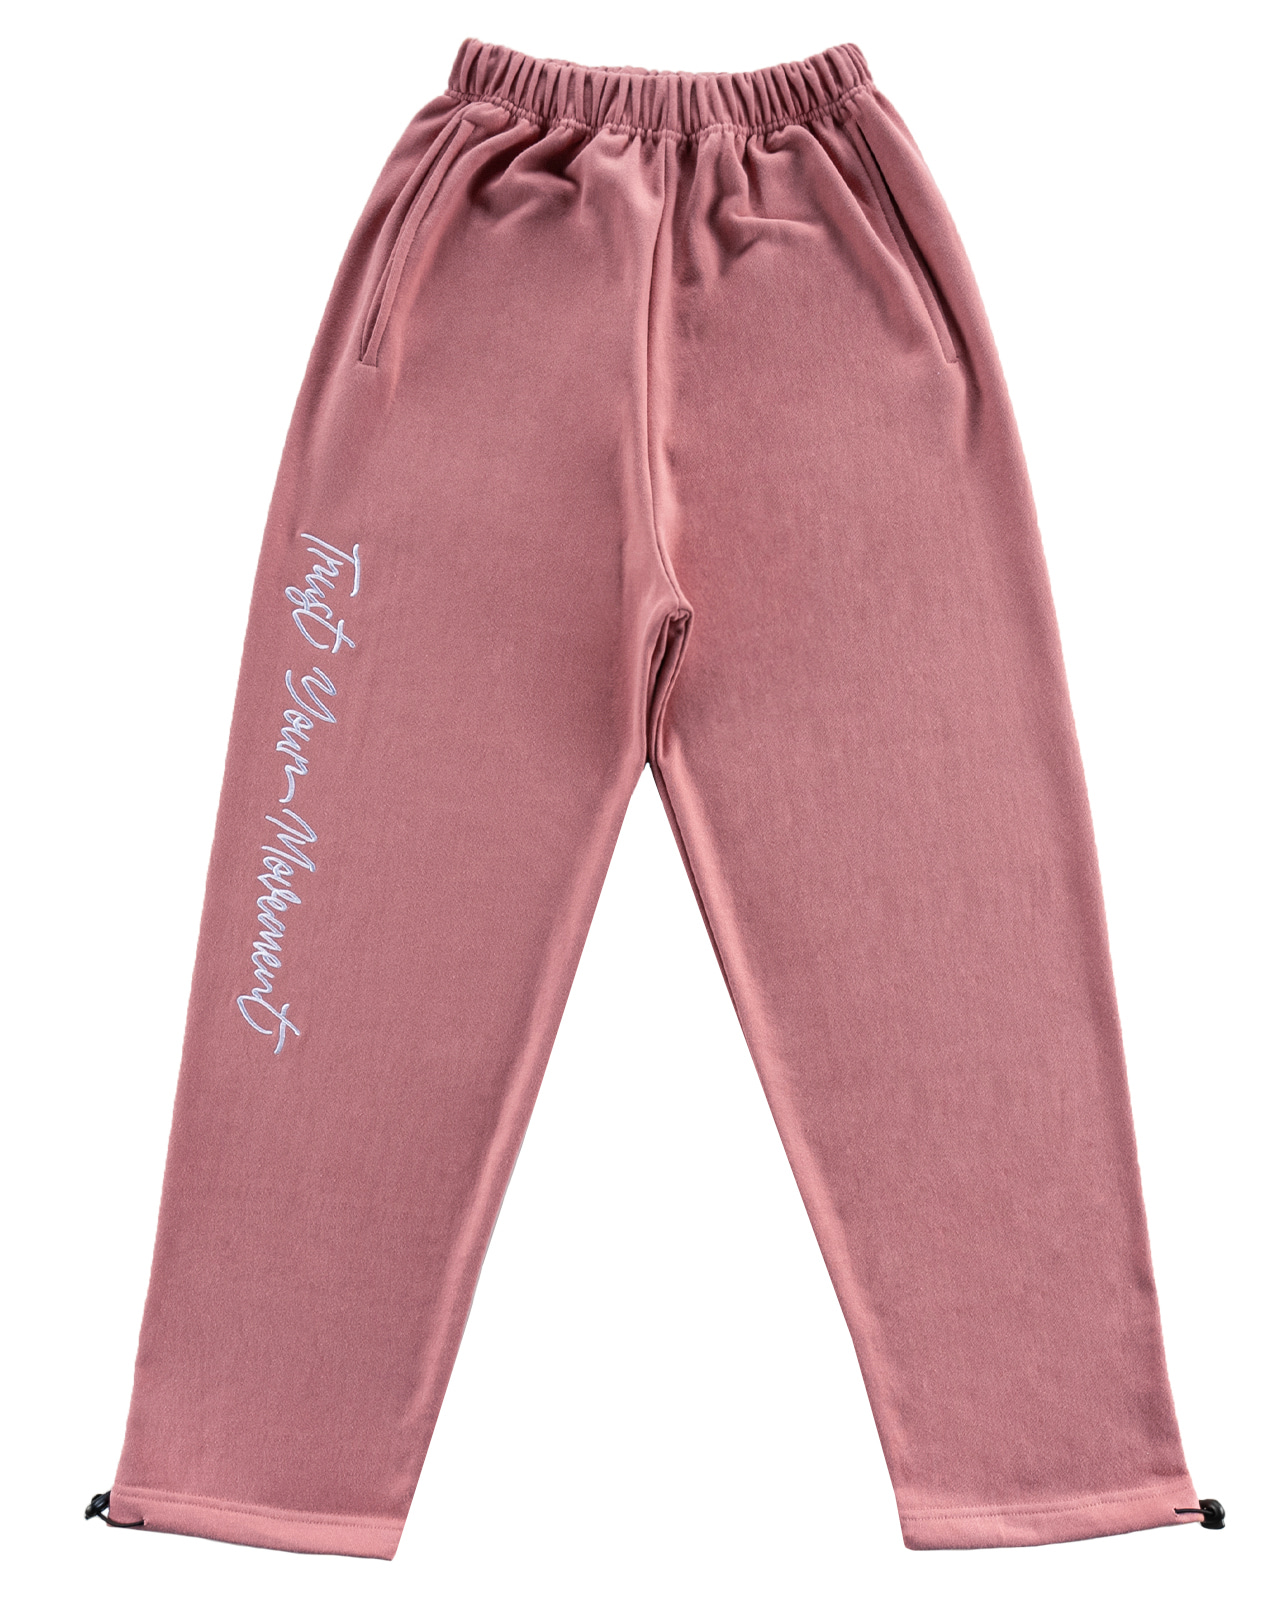 EMBROIDERY SLOGAN LOOSE FIT PANTS PASTEL PINK